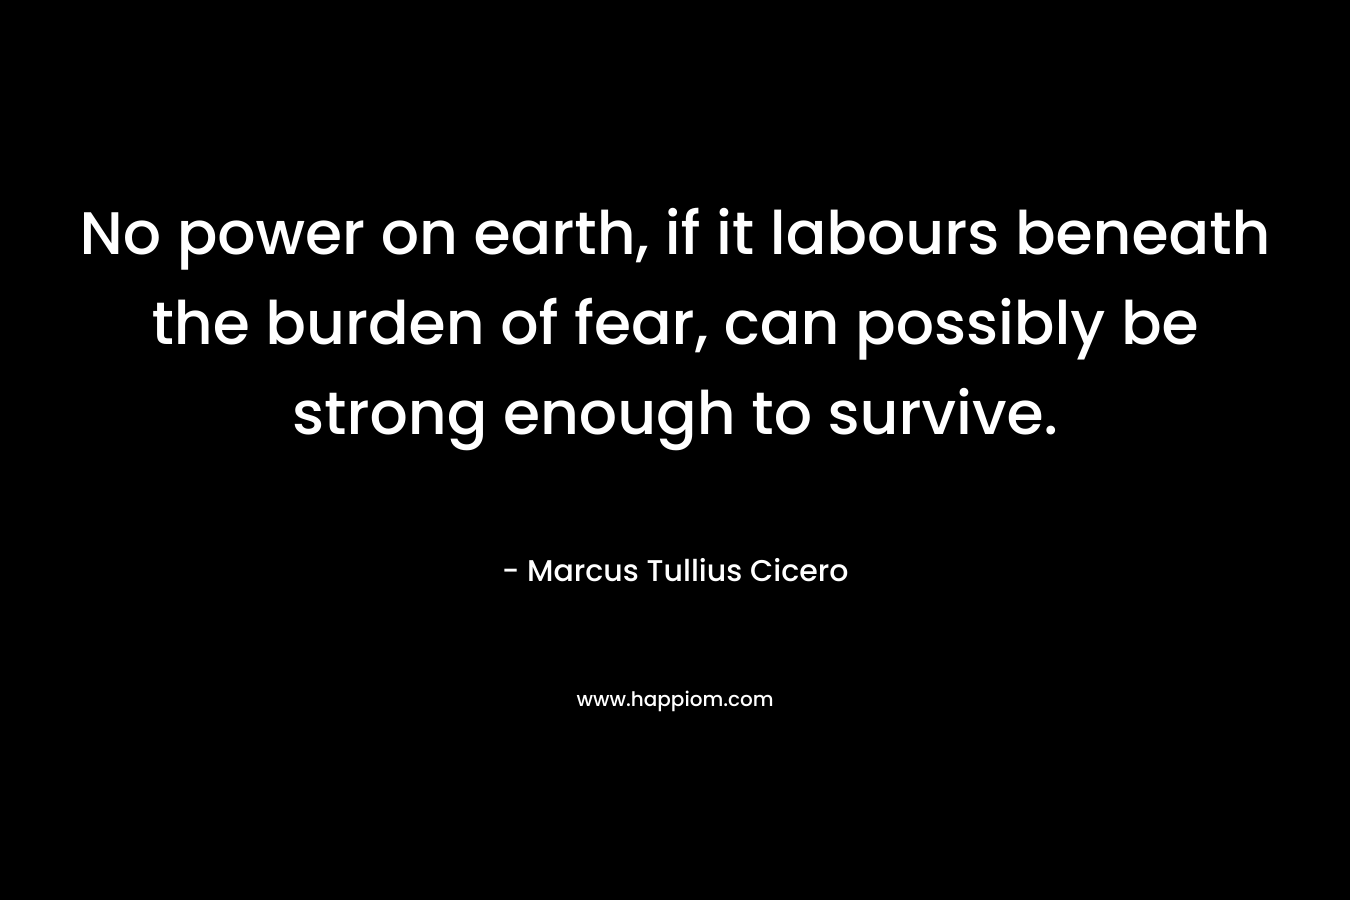 No power on earth, if it labours beneath the burden of fear, can possibly be strong enough to survive.